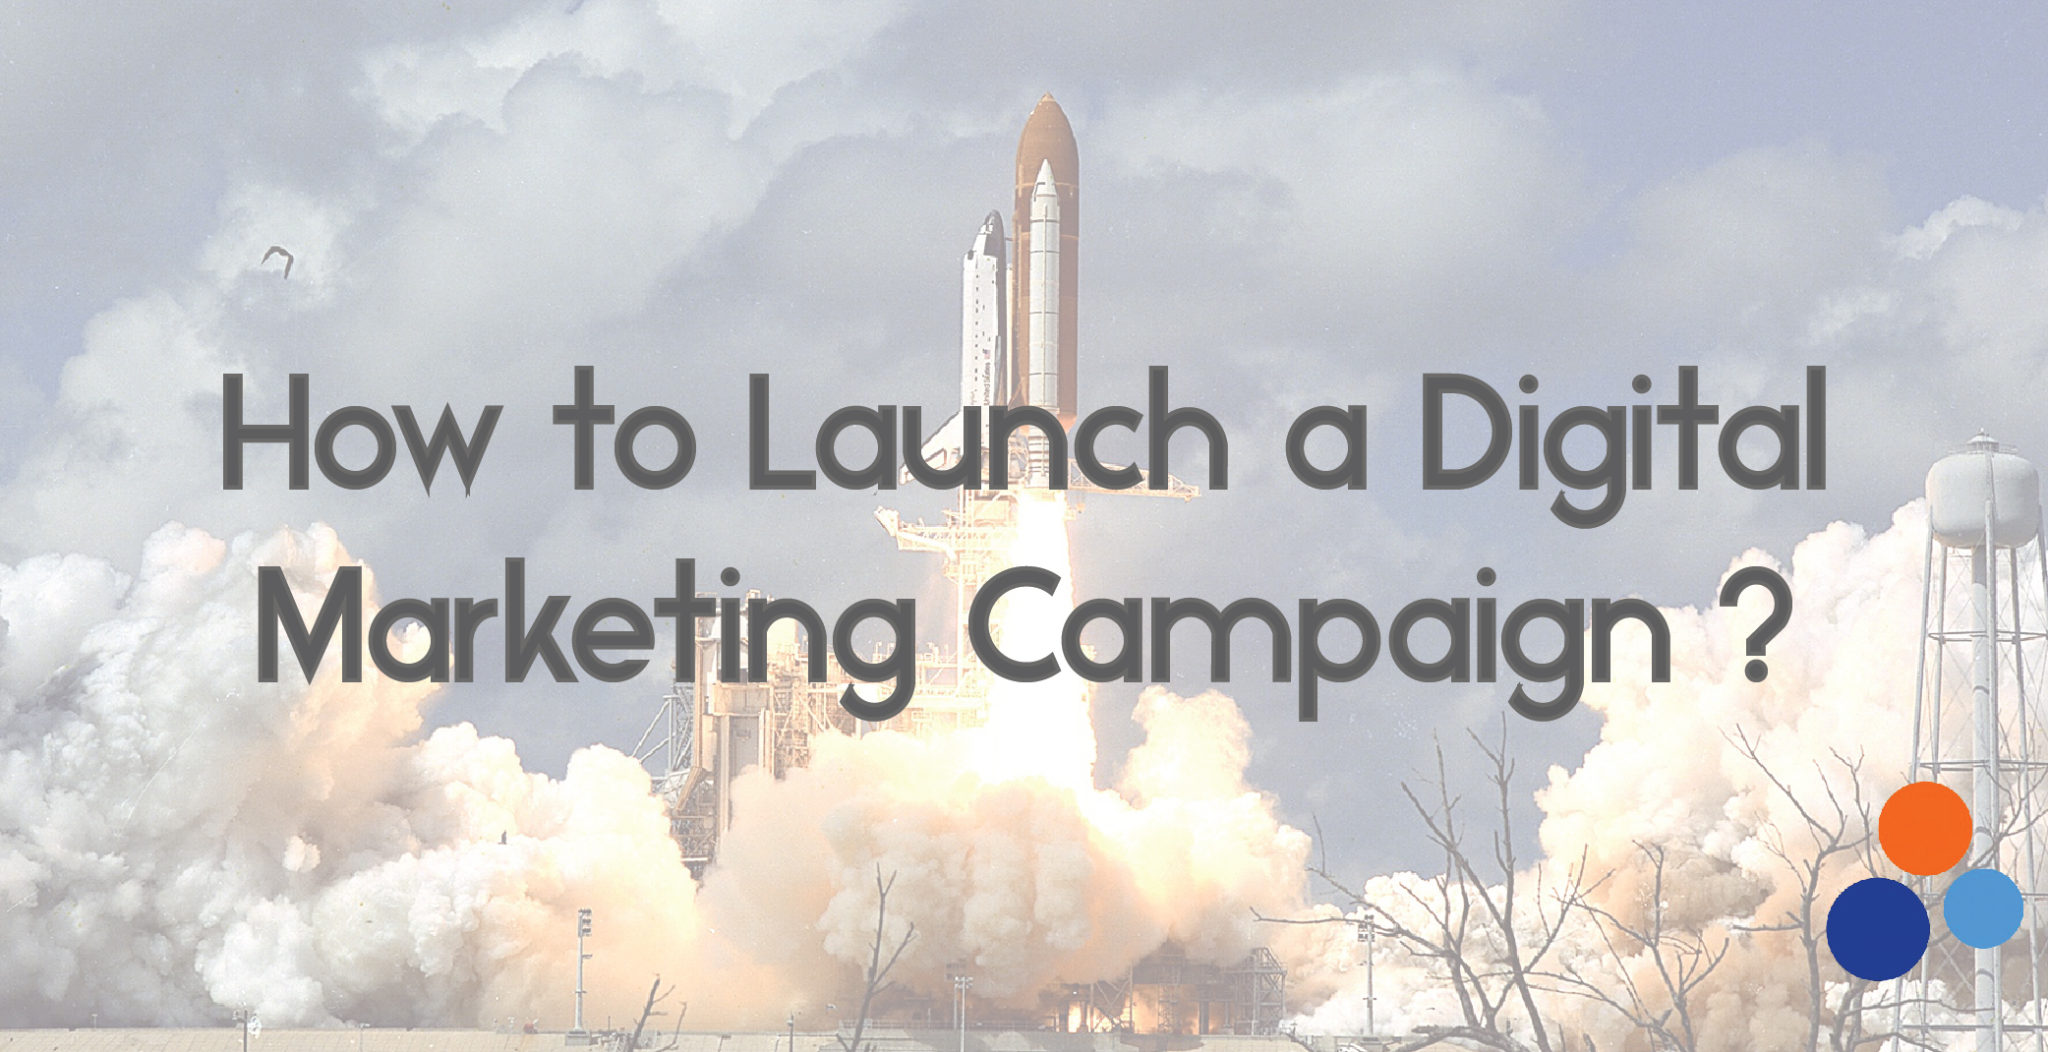 How to Launch a Digital Marketing Campaign